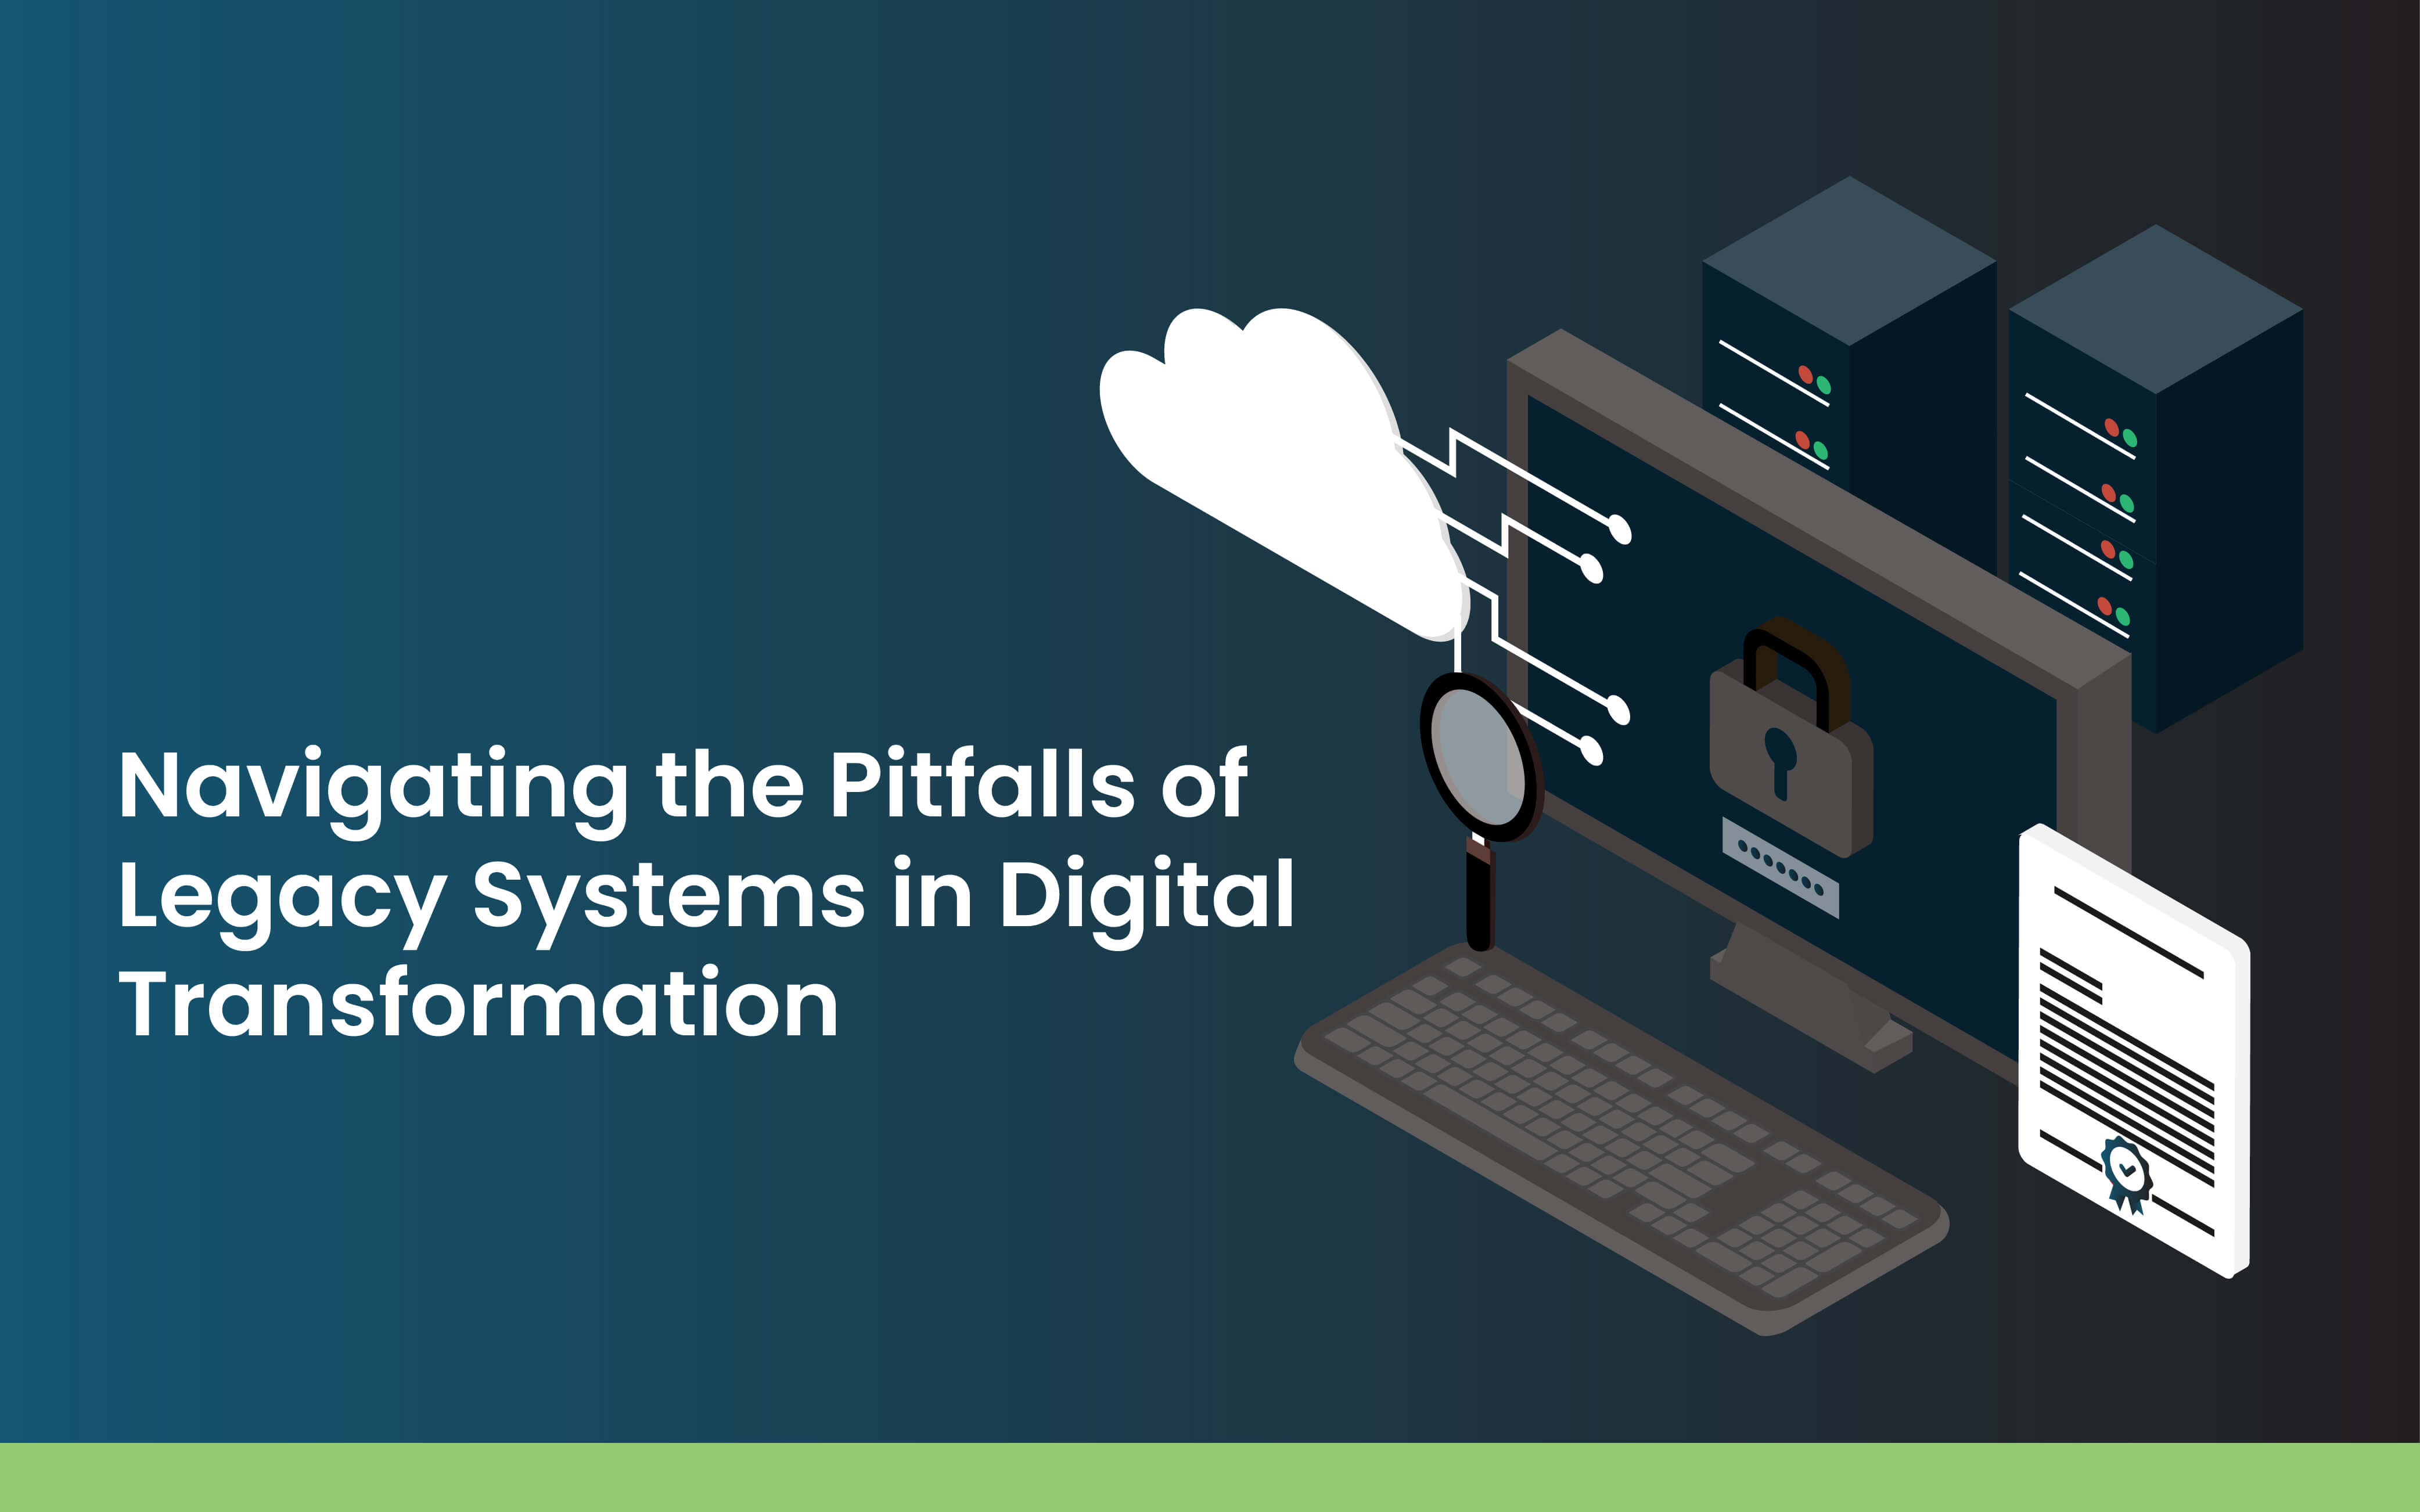 Navigating the Pitfalls of Legacy Systems in Digital Transformation